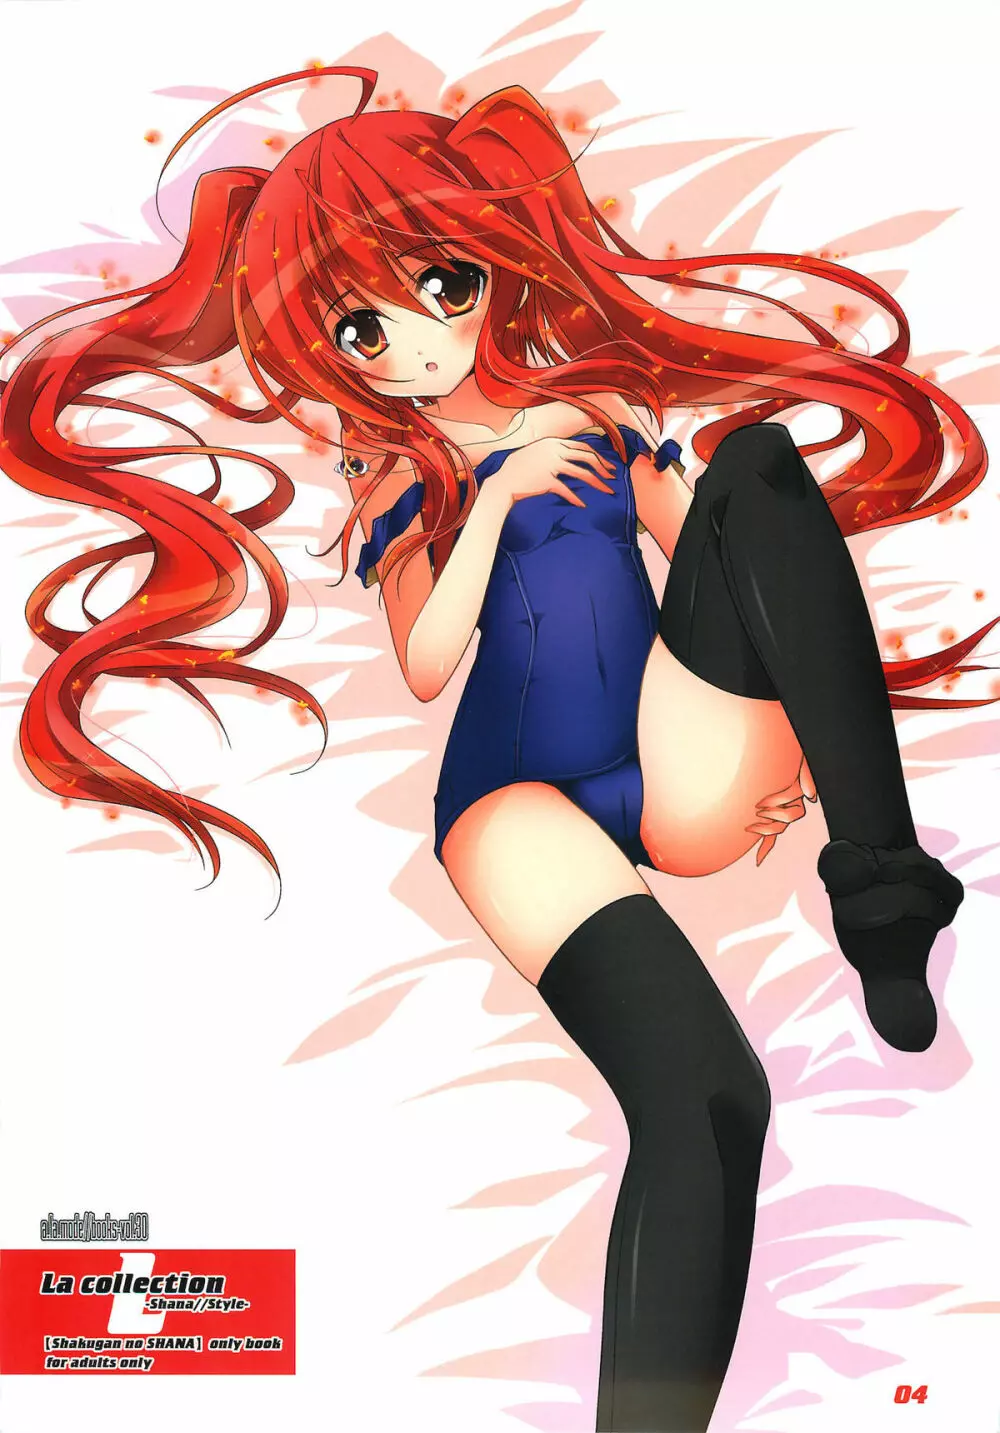 La Collection -Shana／／Style- Page.4